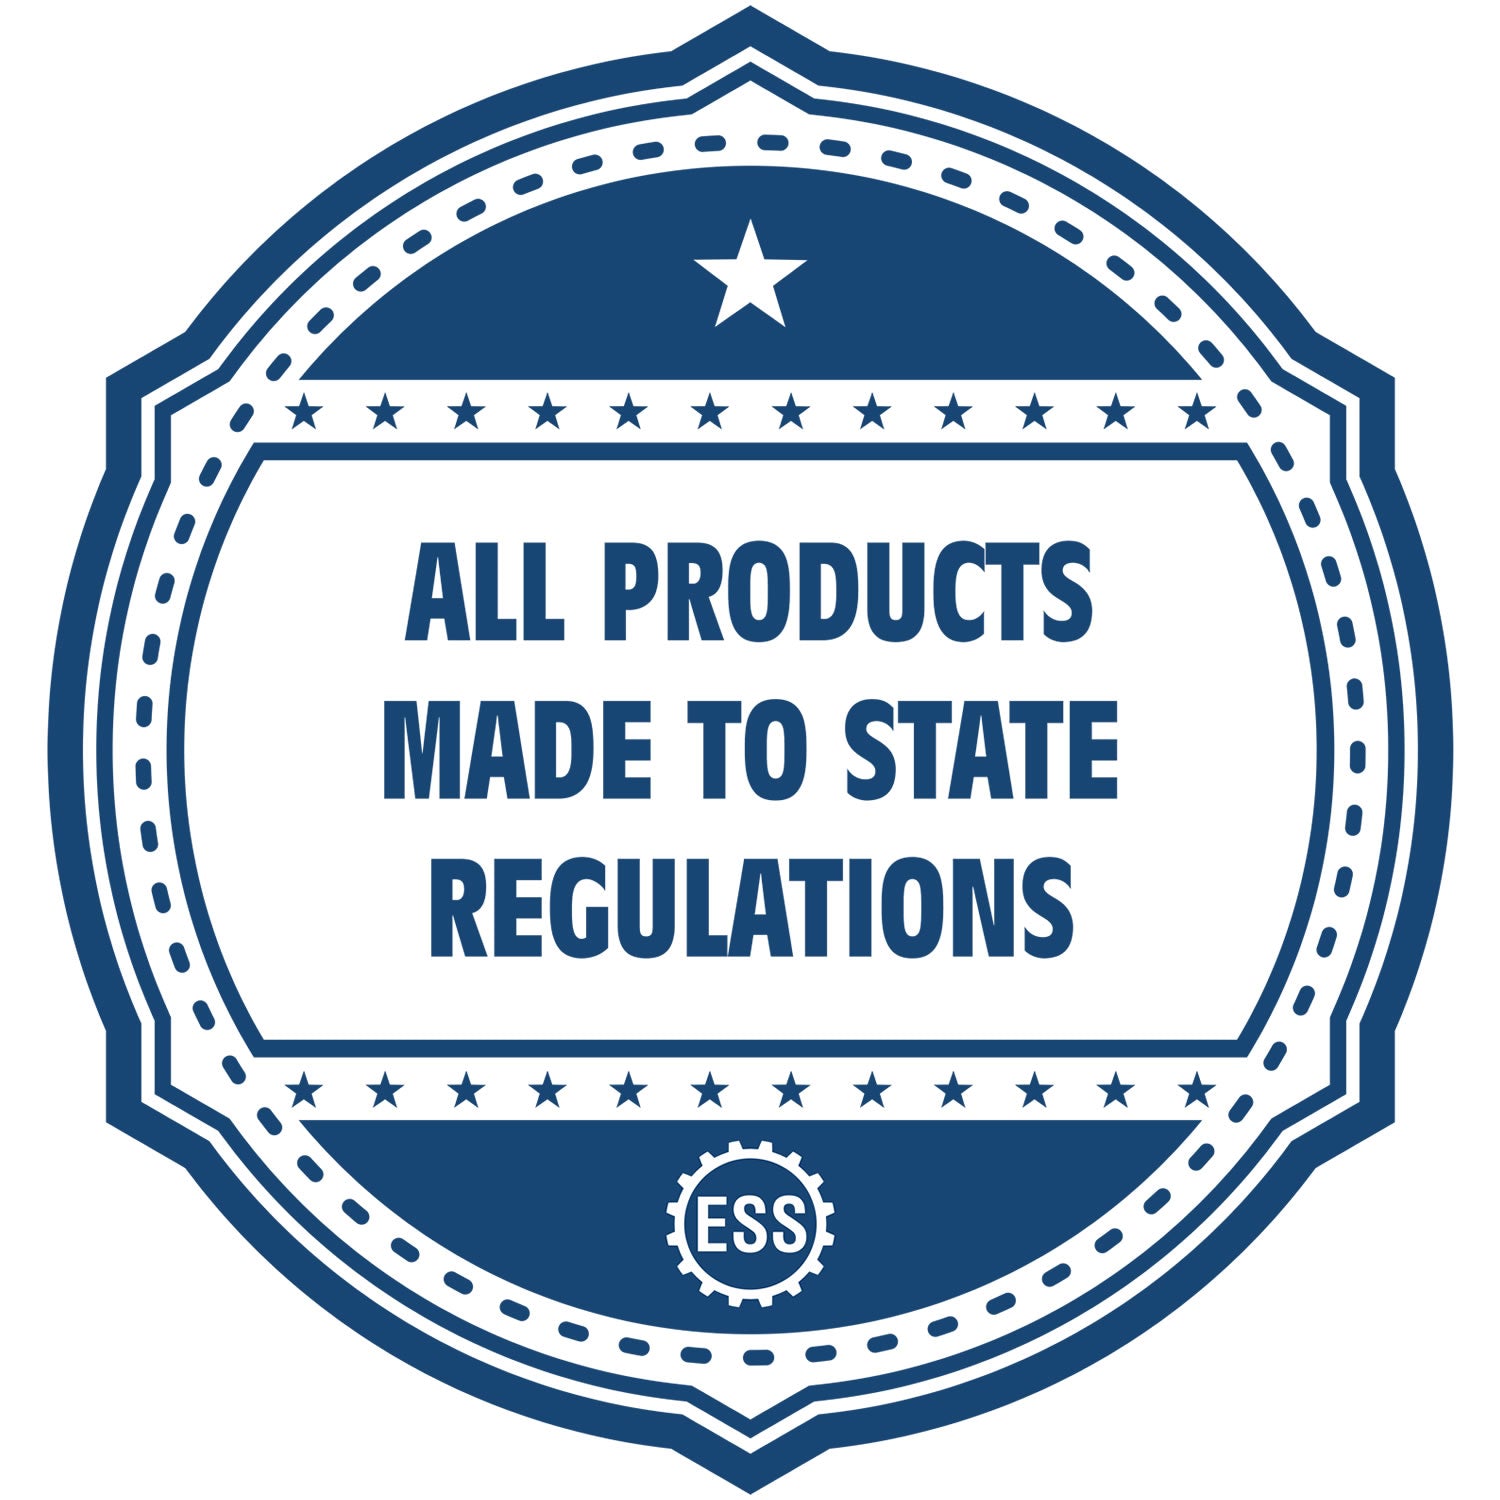 An icon or badge element for the Michigan Landscape Architectural Seal Stamp showing that this product is made in compliance with state regulations.